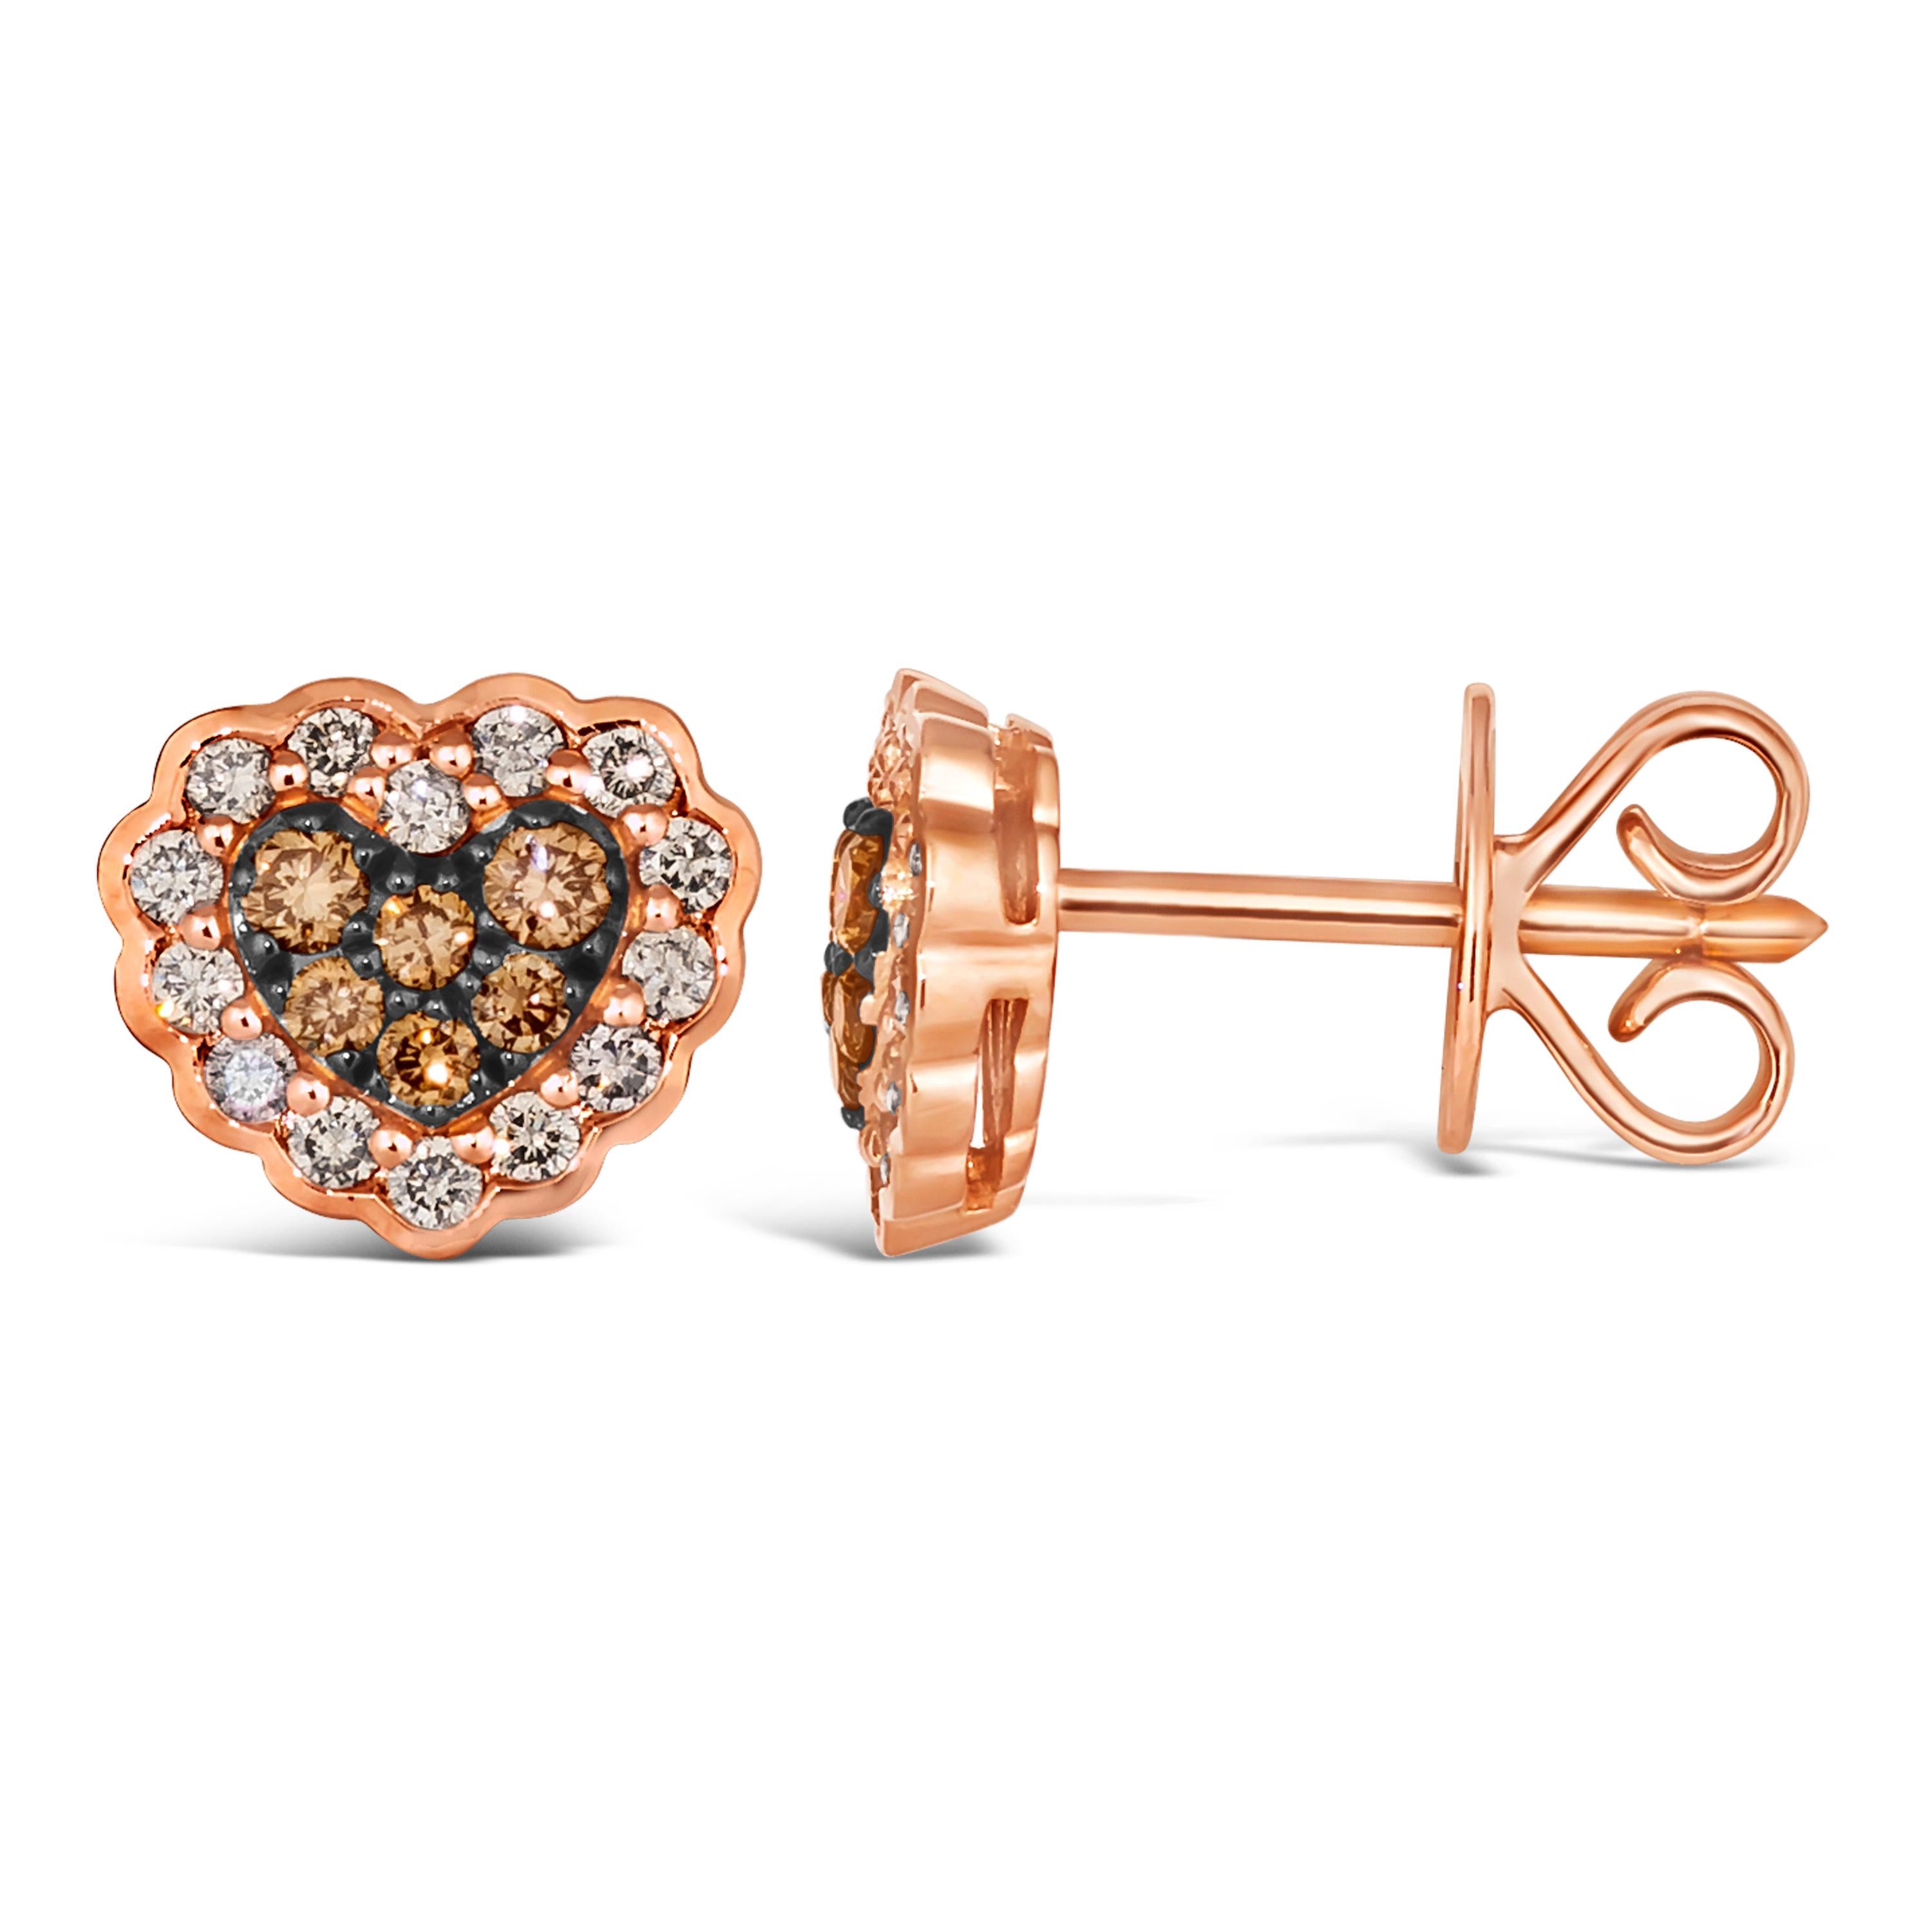 Le Vian® Earrings featuring 1/5 cts. Chocolate Diamonds®, 1/4 cts. Nude Diamonds™ set in 14K Strawberry Gold®